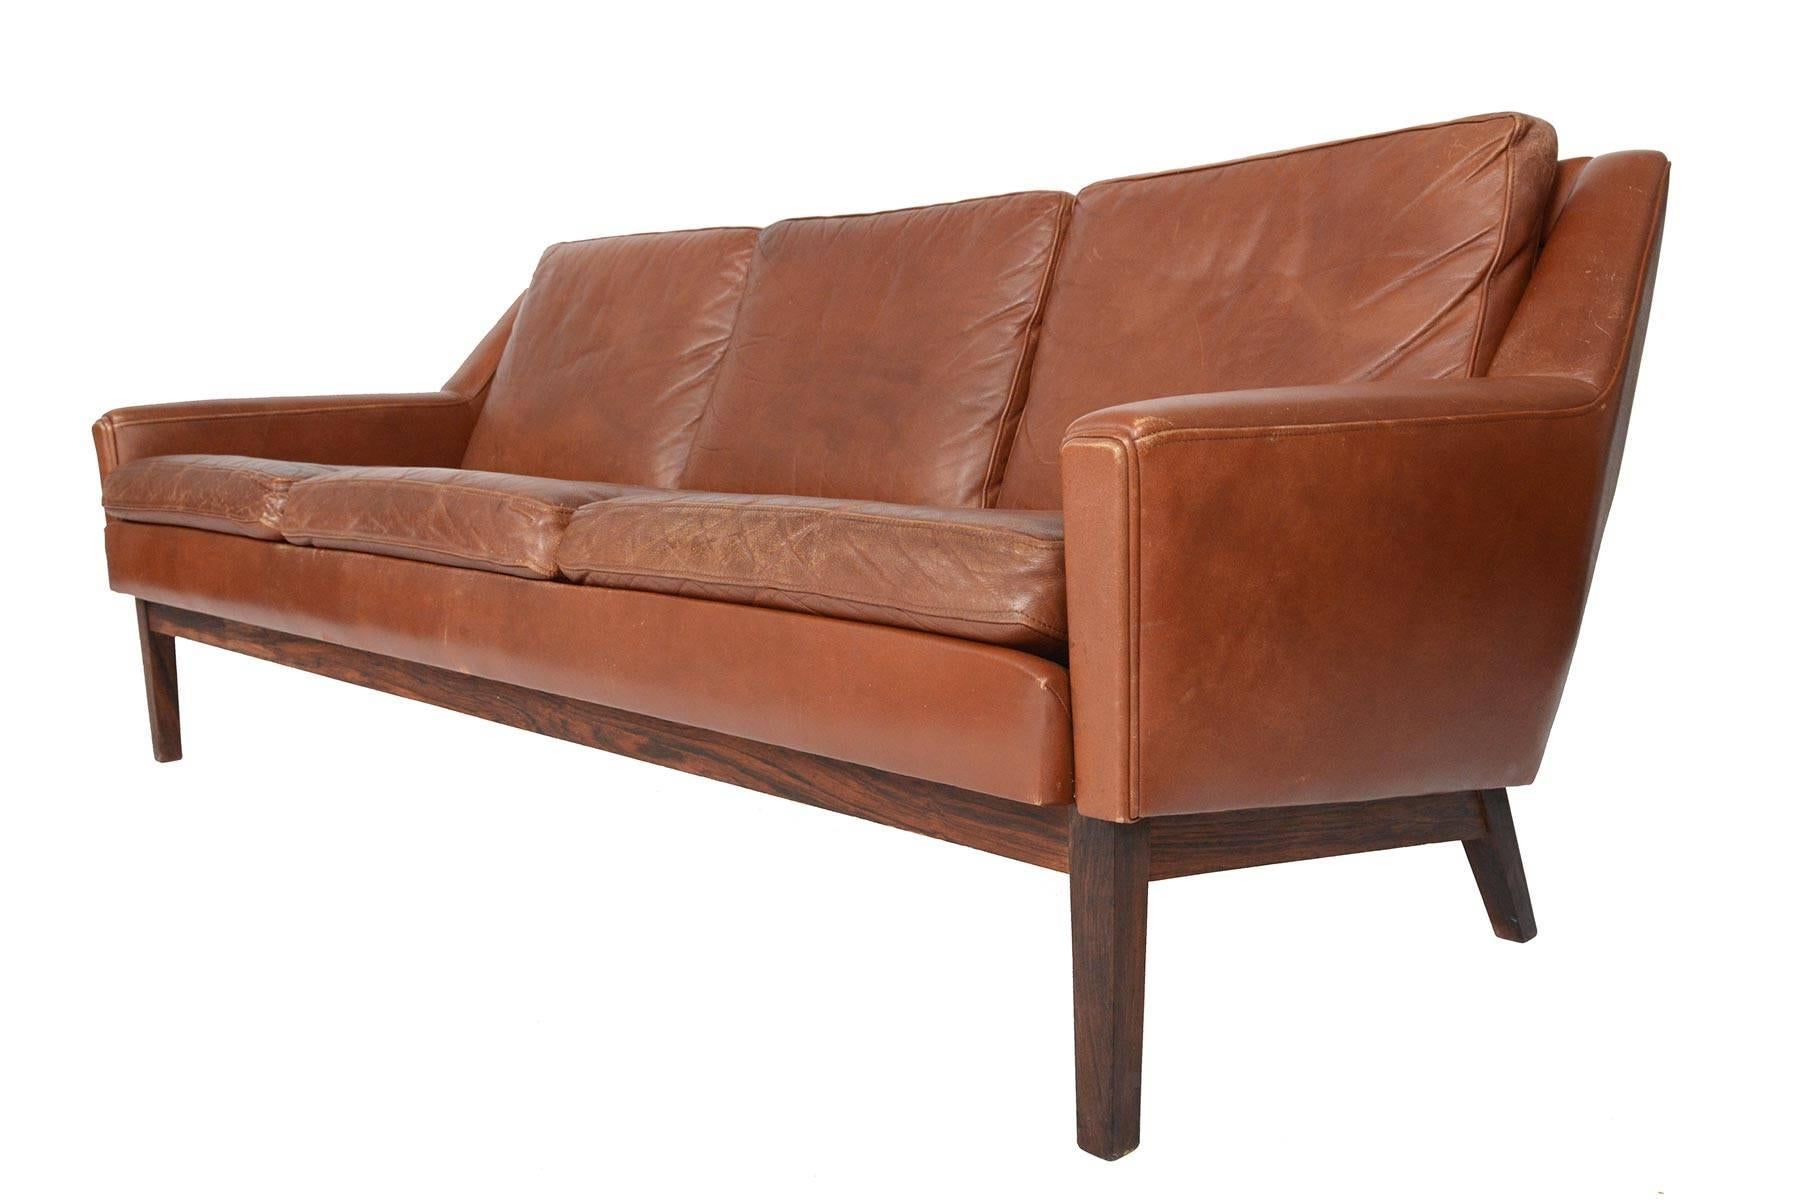 Danish Mid-Century Modern Sofa in Rosewood + Patinated Rust Leather 1